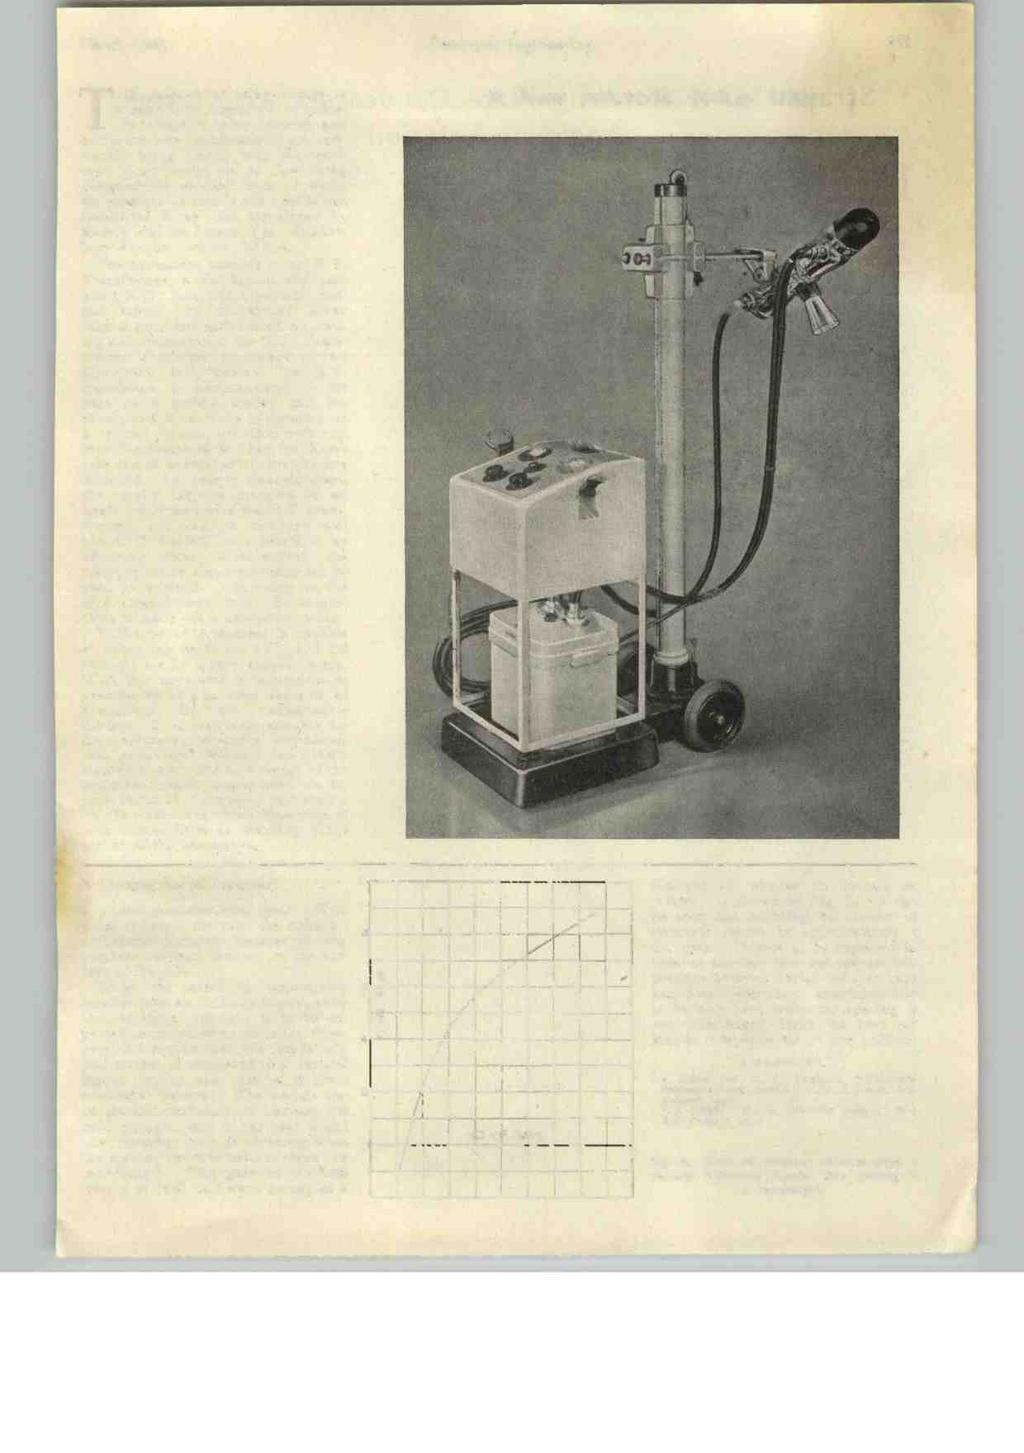 March, 1943 Electronic Engineering 433 THE practice of using X-rays as a method of inspection in industry is rapidly being adopted, and numerous new applications are constantly being found, with the